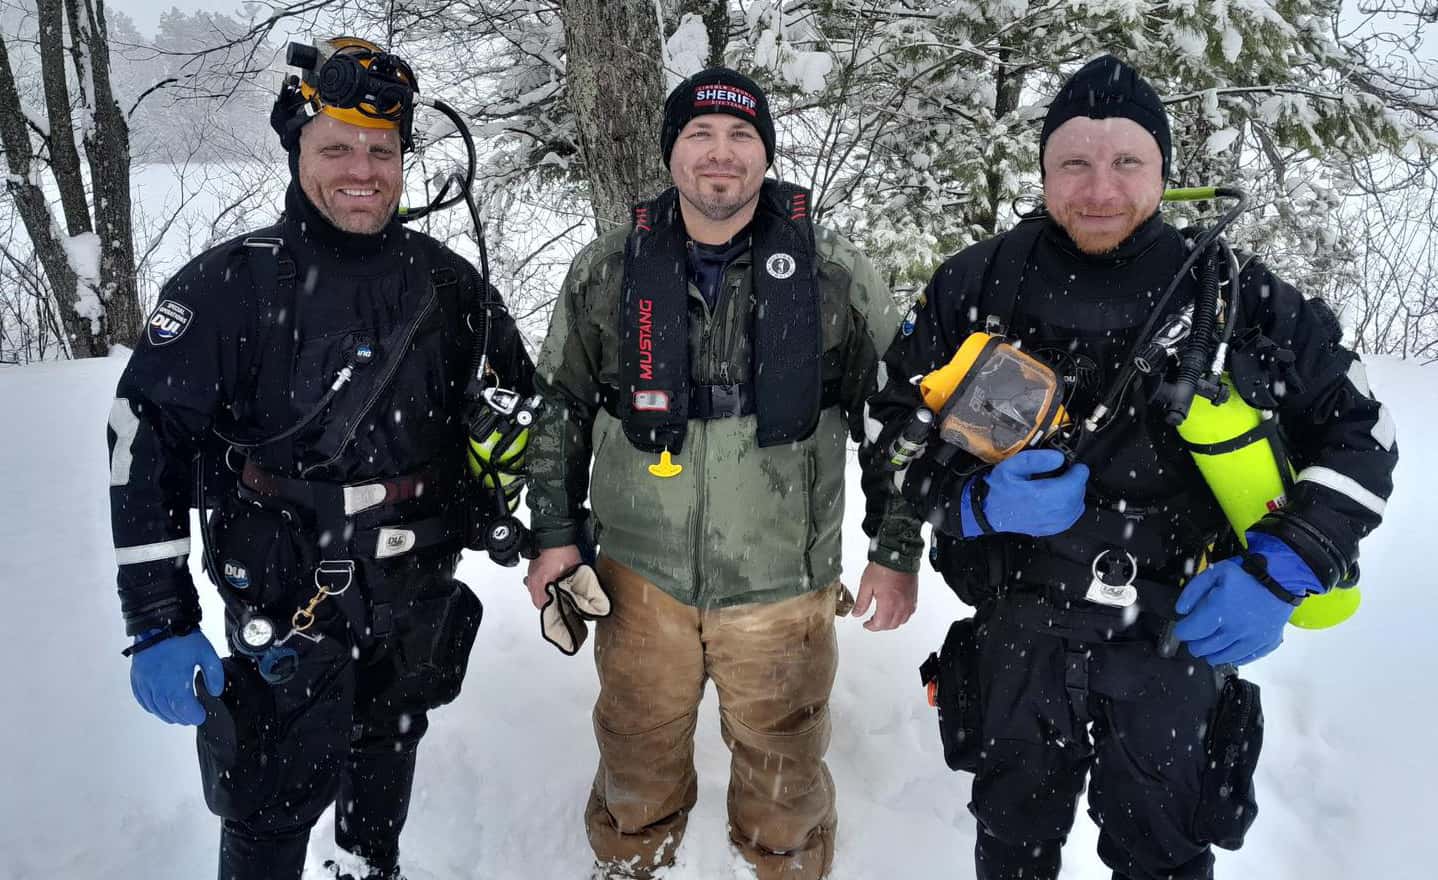 Lincoln, Oneida County dive teams hold ice rescue training exercise